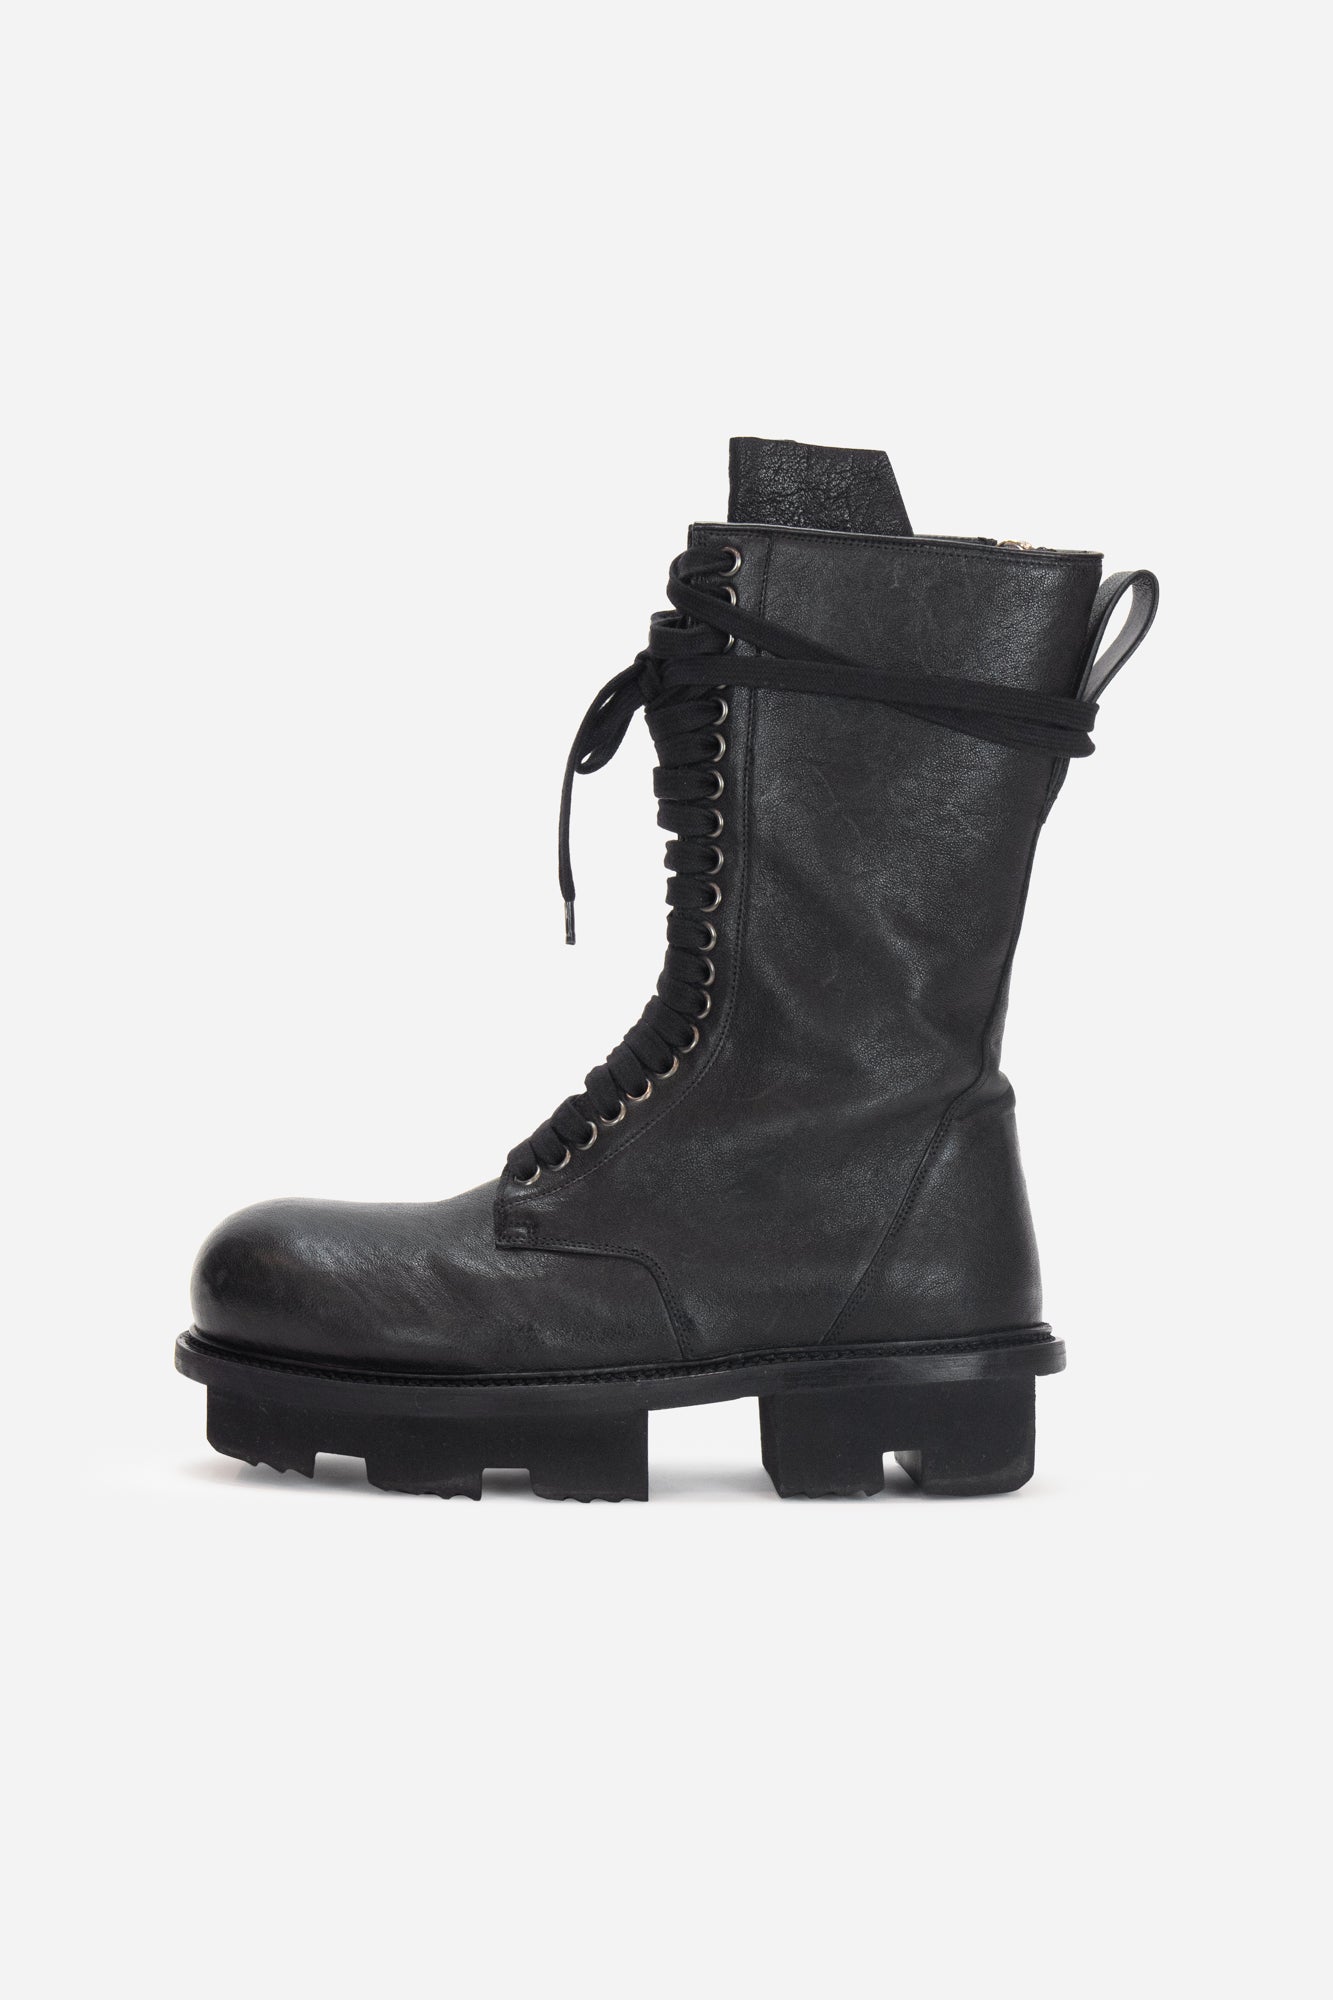 Black Technical Army Boots